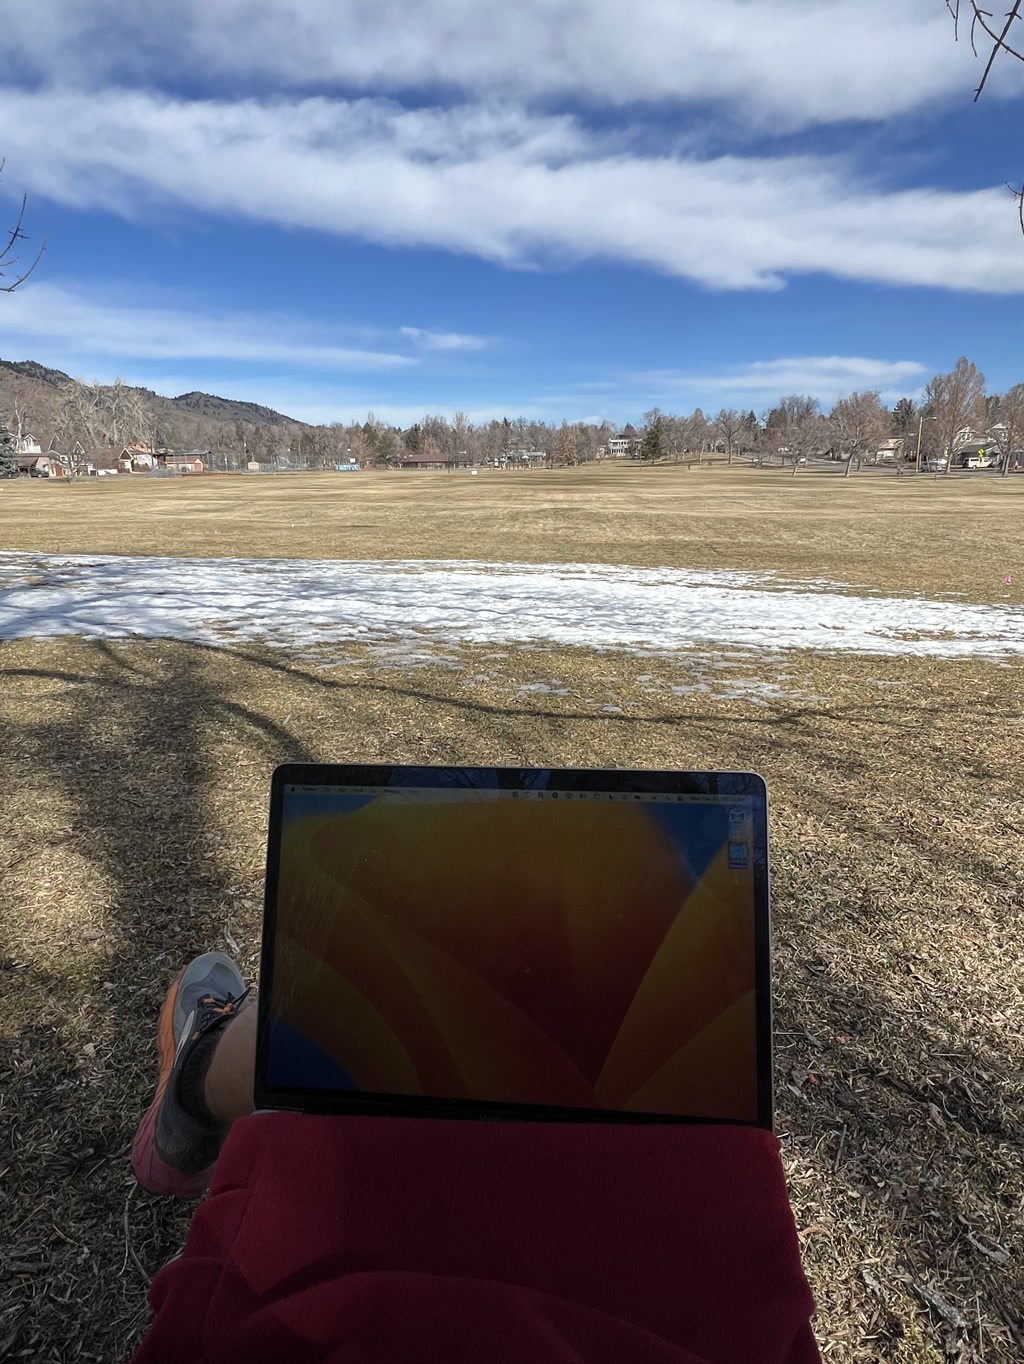 A person sits on a grassy field with remnants of snow scattered around, working on a laptop resting on their lap covered by a red piece of fabric, possibly a blanket. They are wearing a dark shoe and a portion of their leg is visible. The ground appears to be partly covered with shade, hinting at the presence of trees out of frame. Beyond the laptop is a vast open field edged by a line of trees and houses, with hills or low mountains visible in the background under a blue sky with some scattered white clouds.